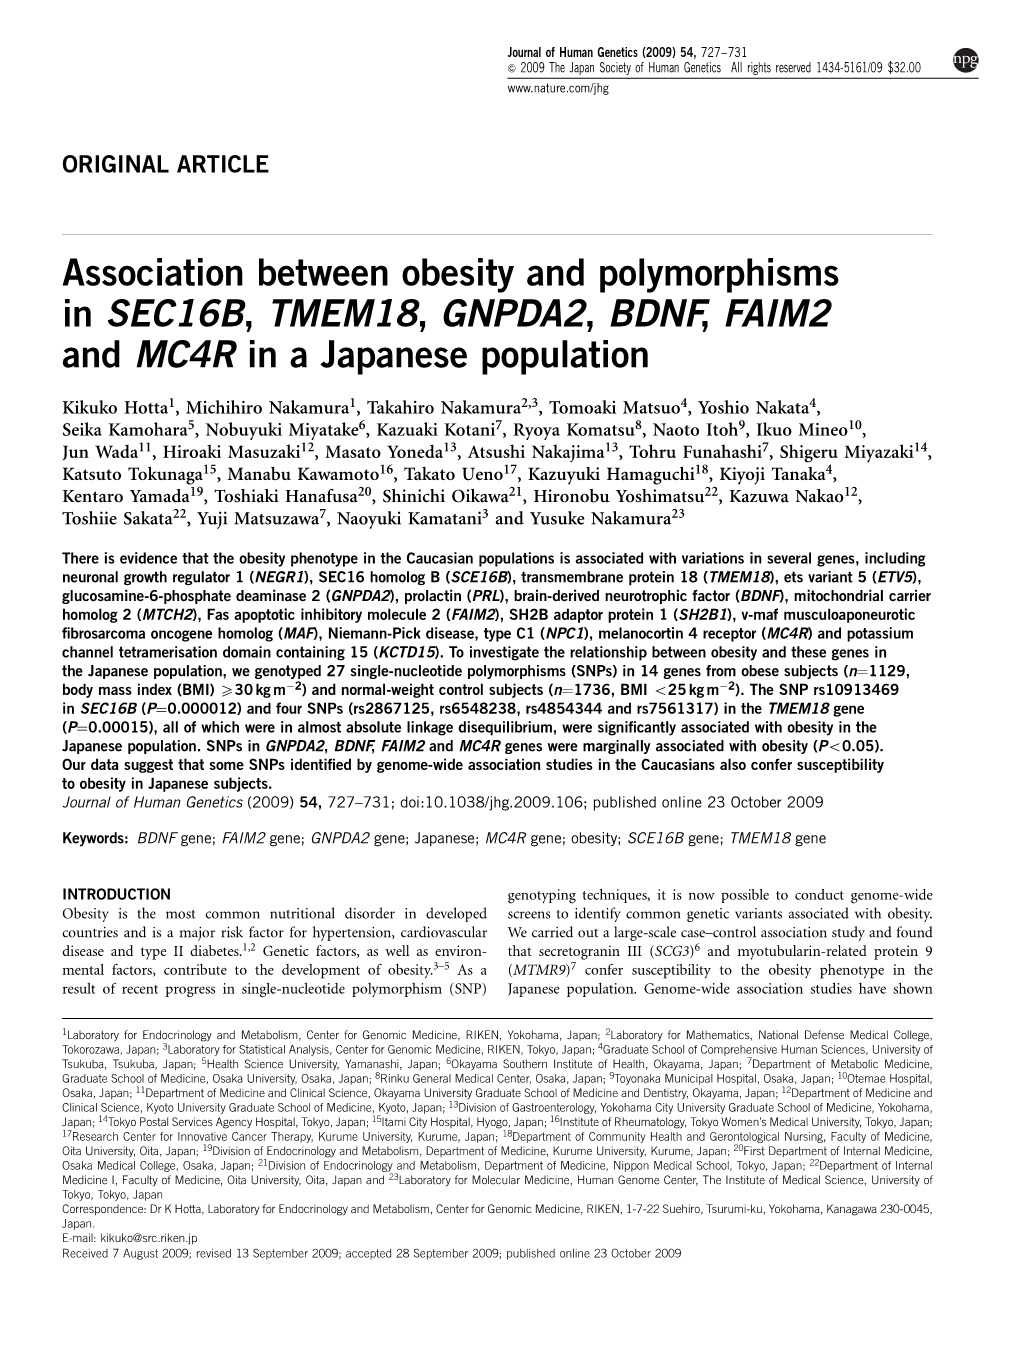 Association Between Obesity and Polymorphisms in SEC16B, TMEM18, GNPDA2, BDNF, FAIM2 and MC4R in a Japanese Population